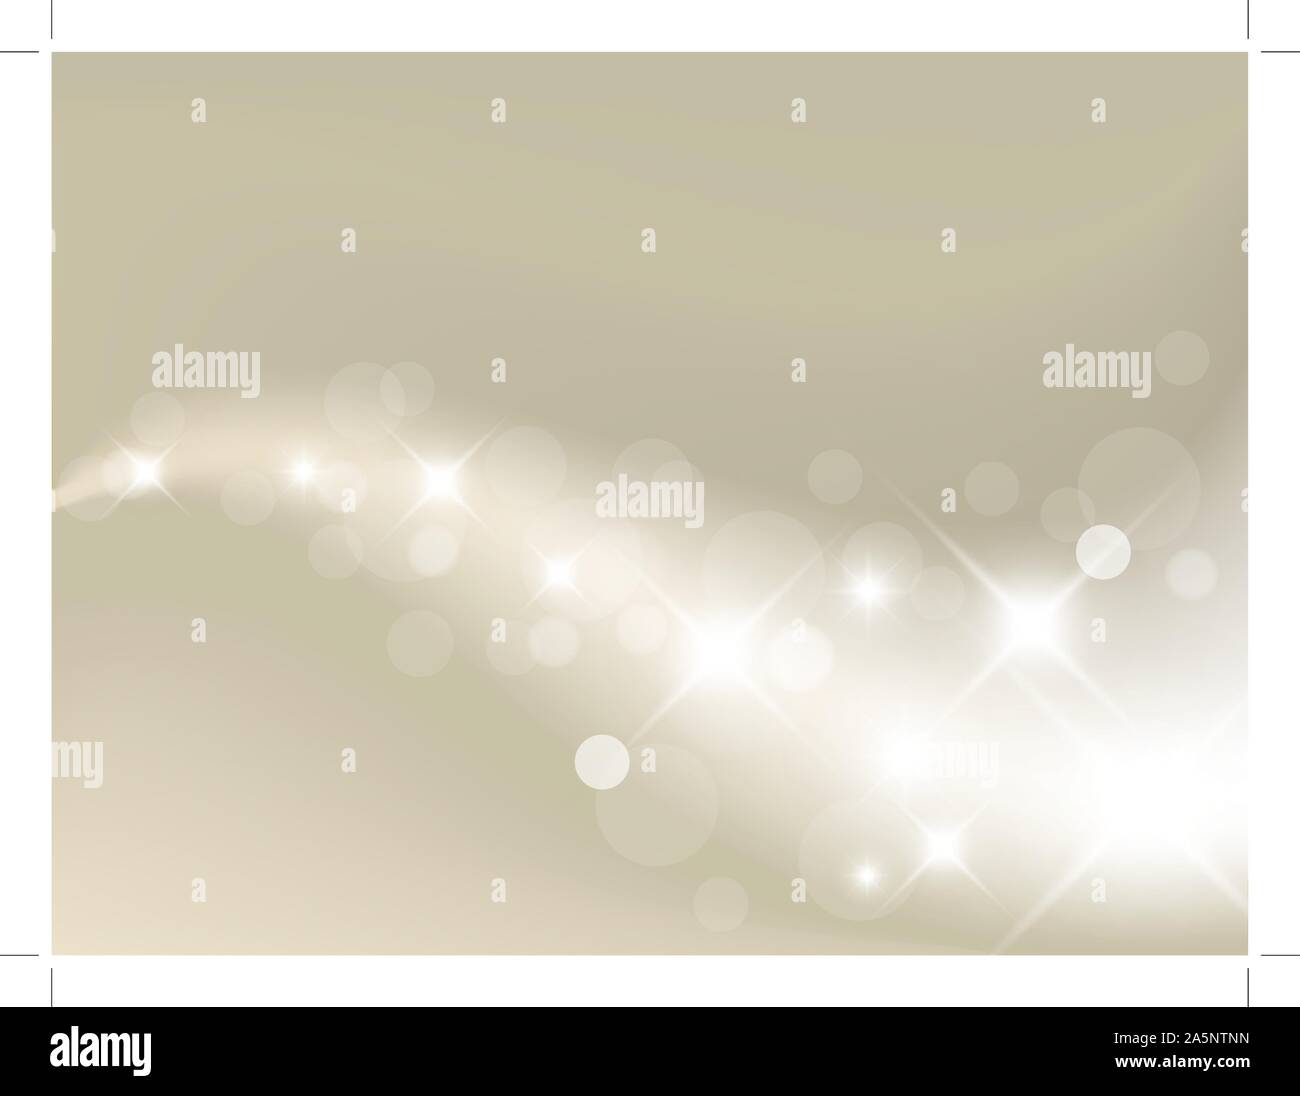 Light silver abstract background with place for your content Stock Vector